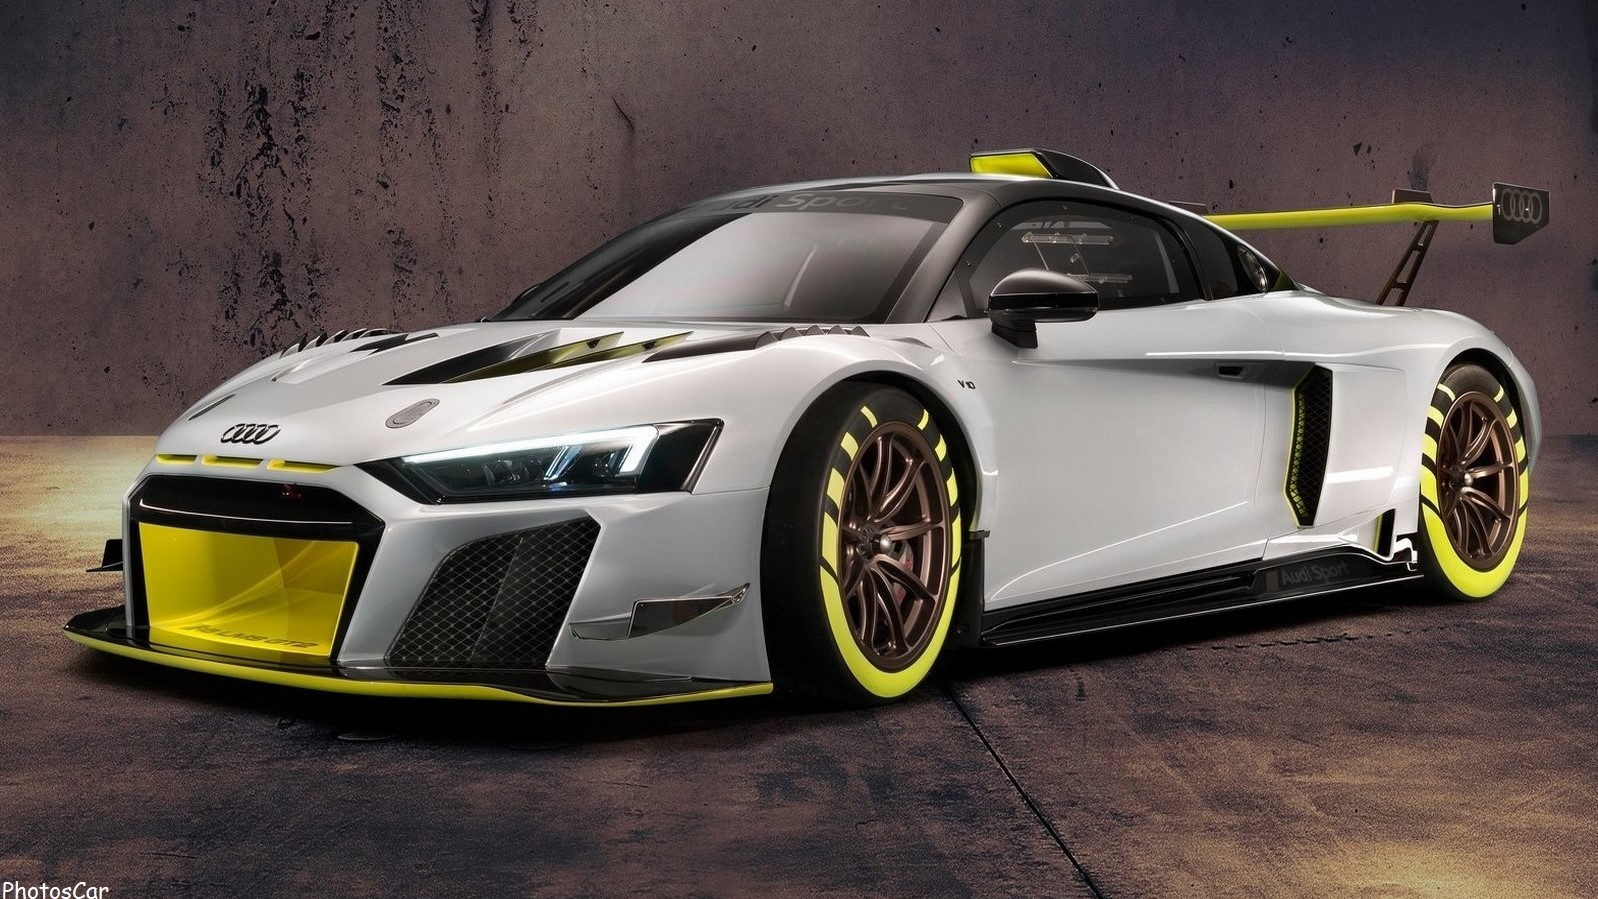 2020 Audi R8 LMS GT2: Race Ready Performance On The Track